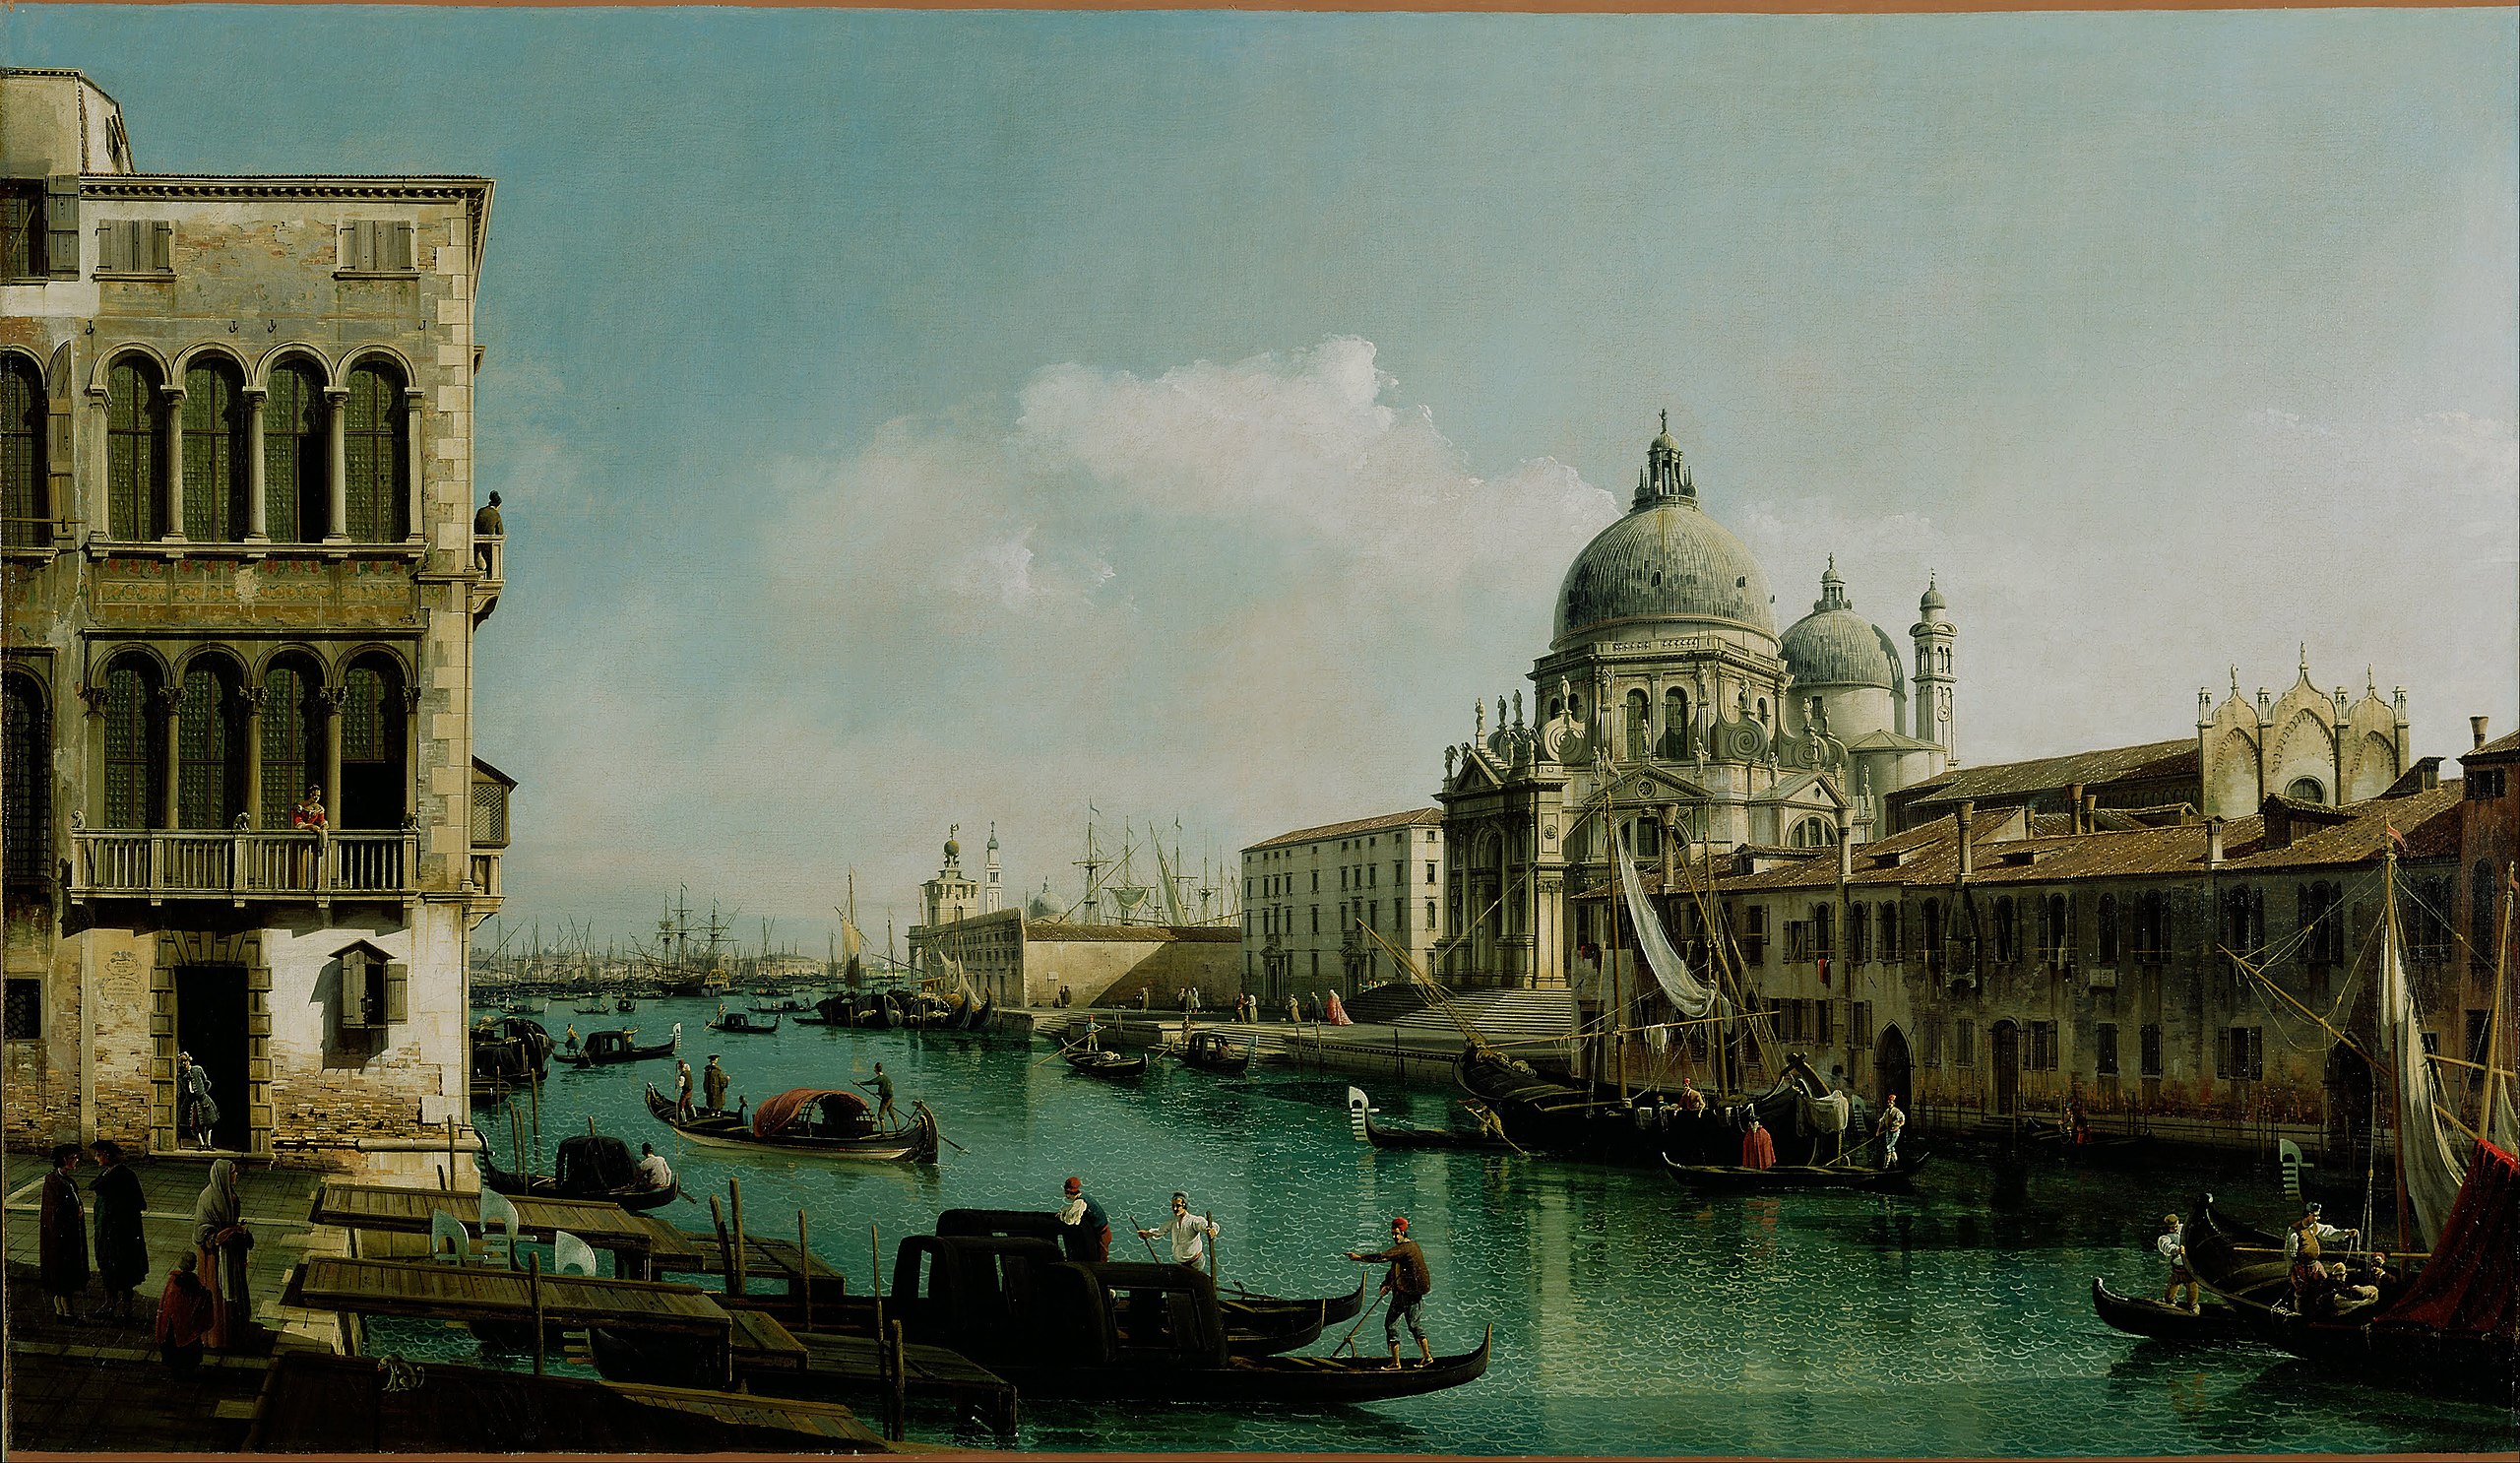 View of the Grand Canal and the Dogana by Bernardo Bellotto (Canaletto) - 1743 - 236.9 x 139 cm J. Paul Getty Museum